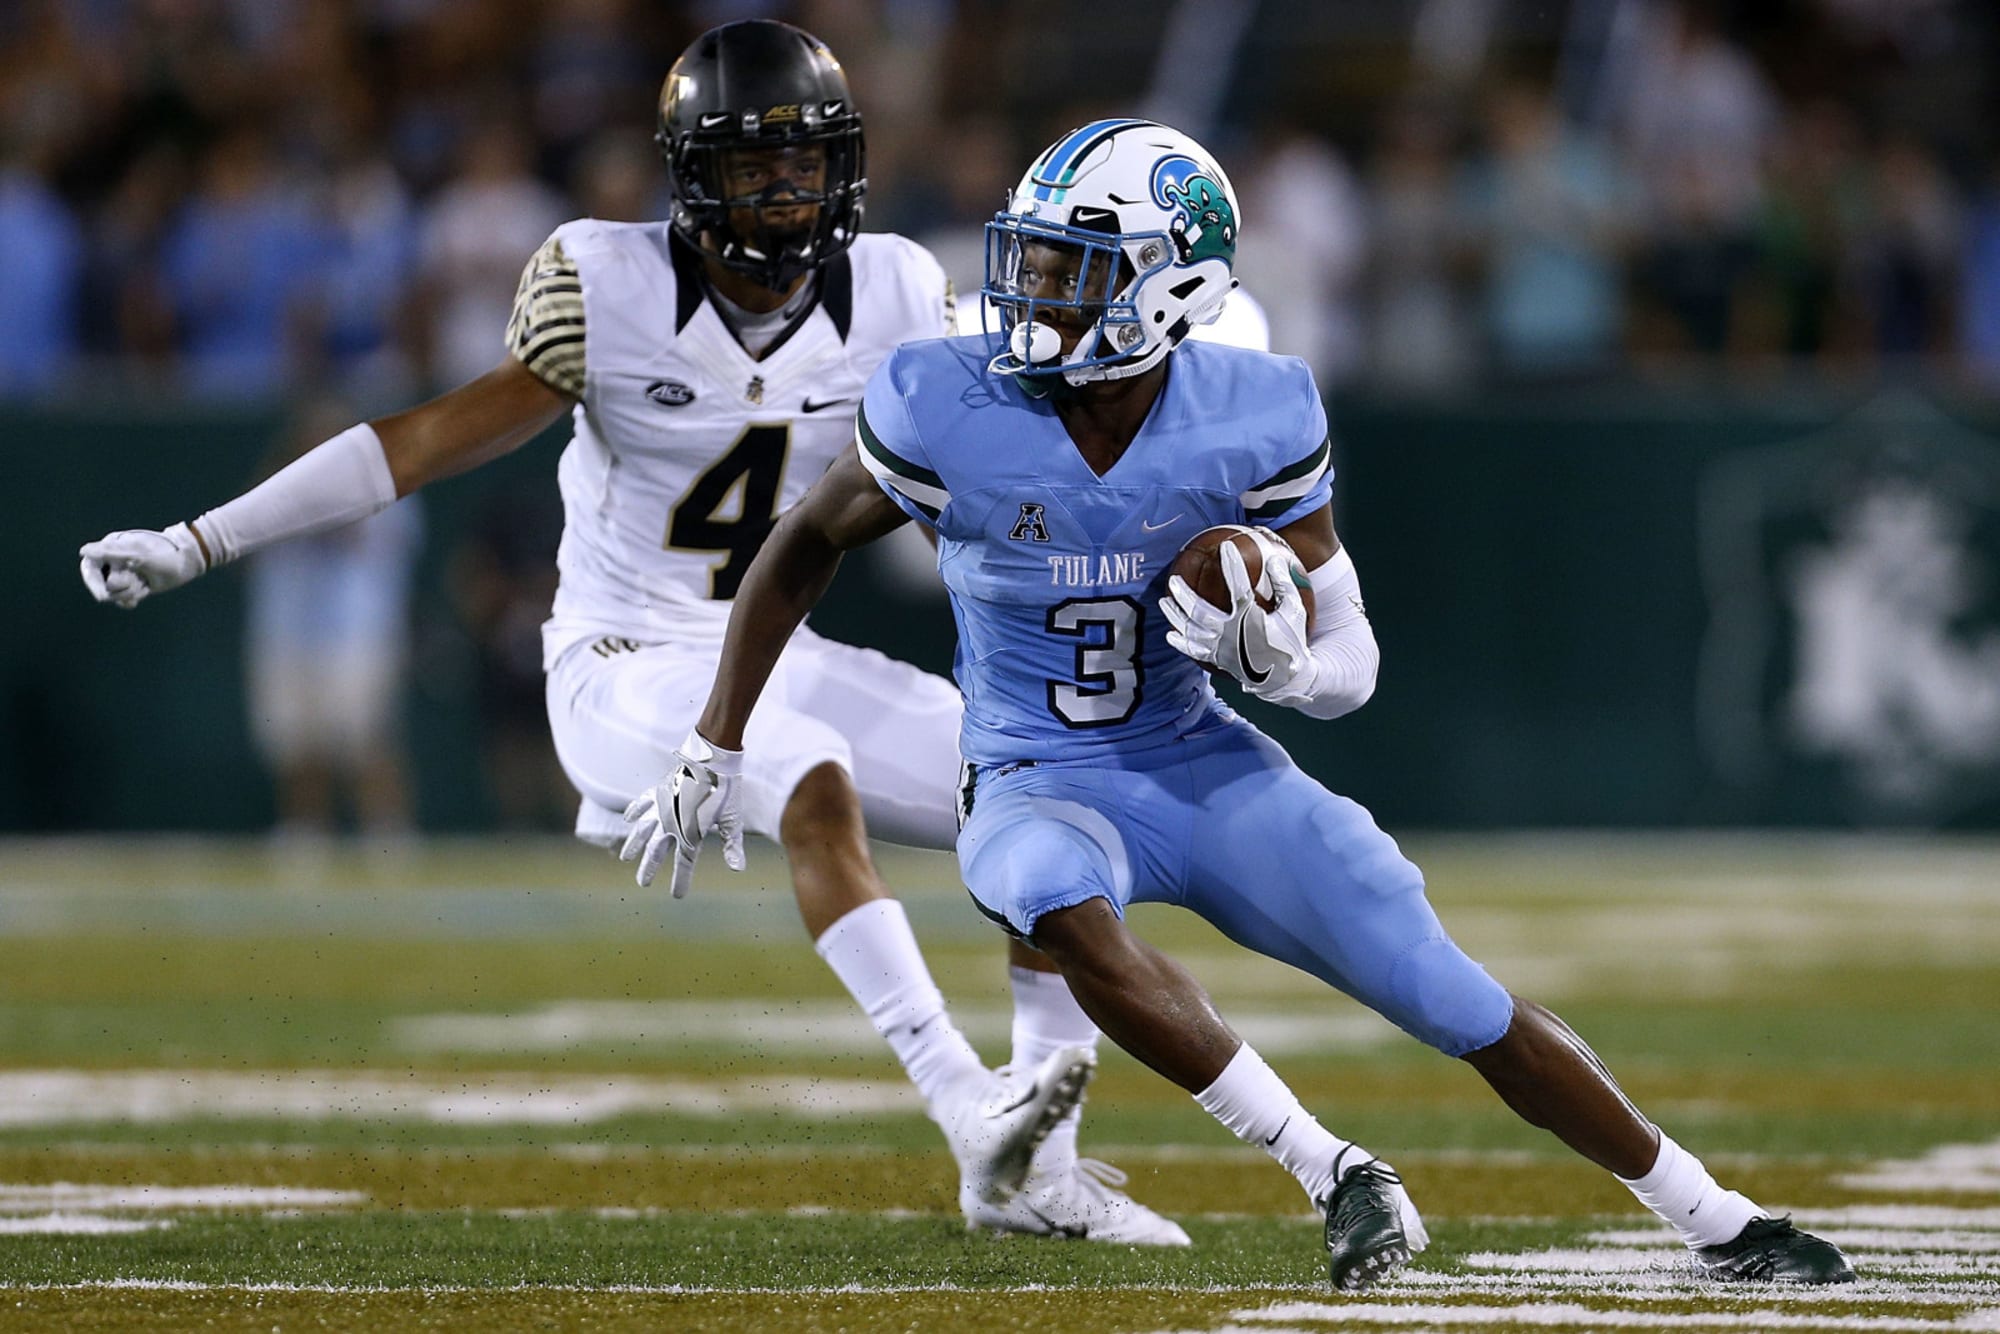 Chicago Bears: Rookie WR Darnell Mooney could be a game changer